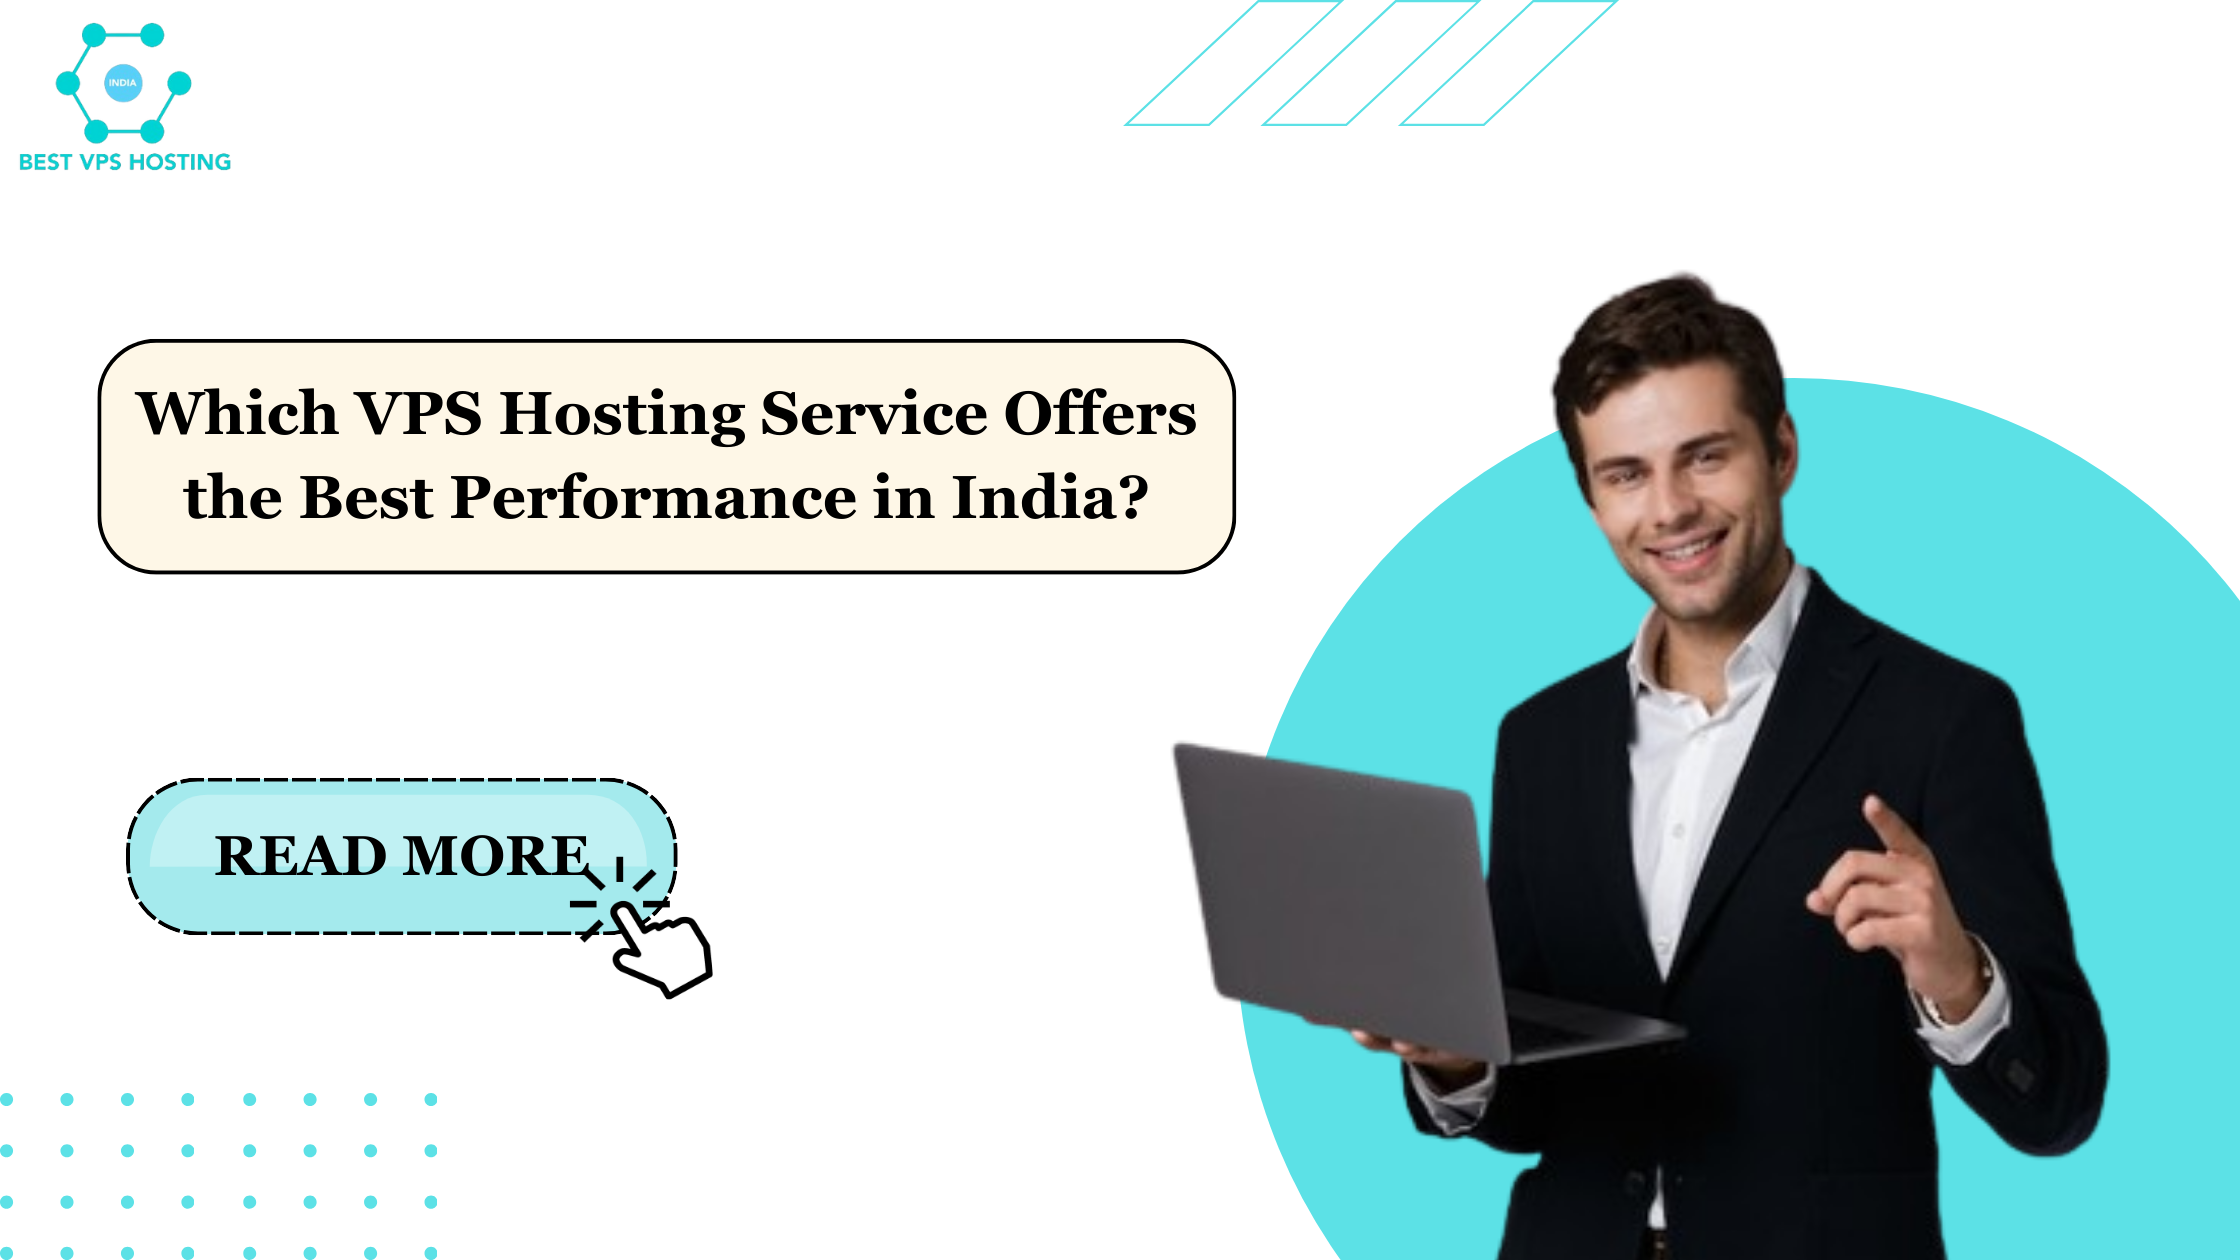 Which VPS Hosting Service Offers the Best Performance in India